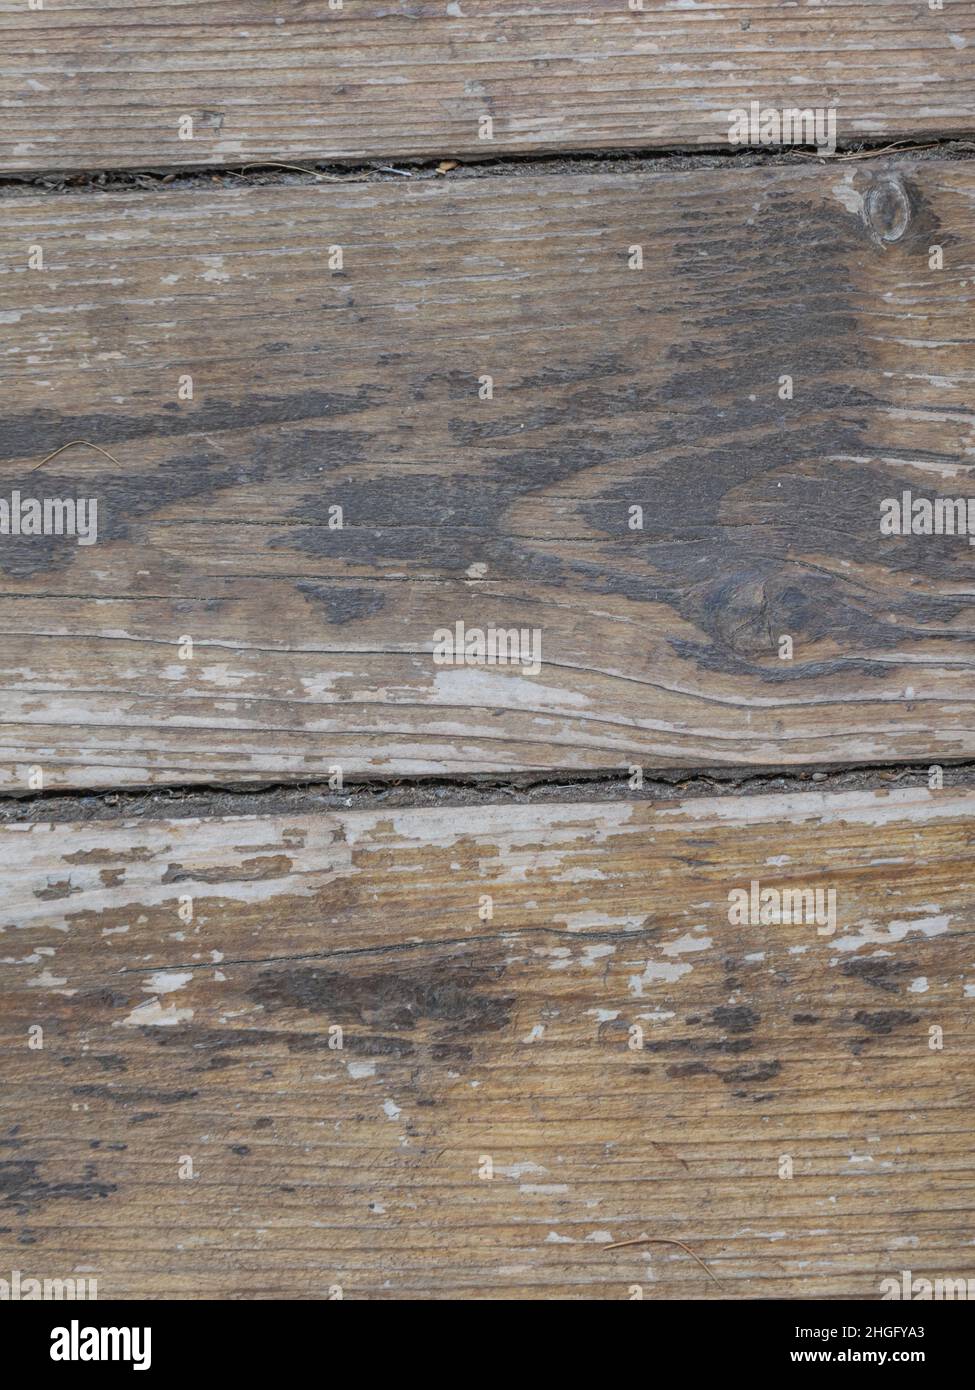 rough light wooden background made of planks Stock Photo